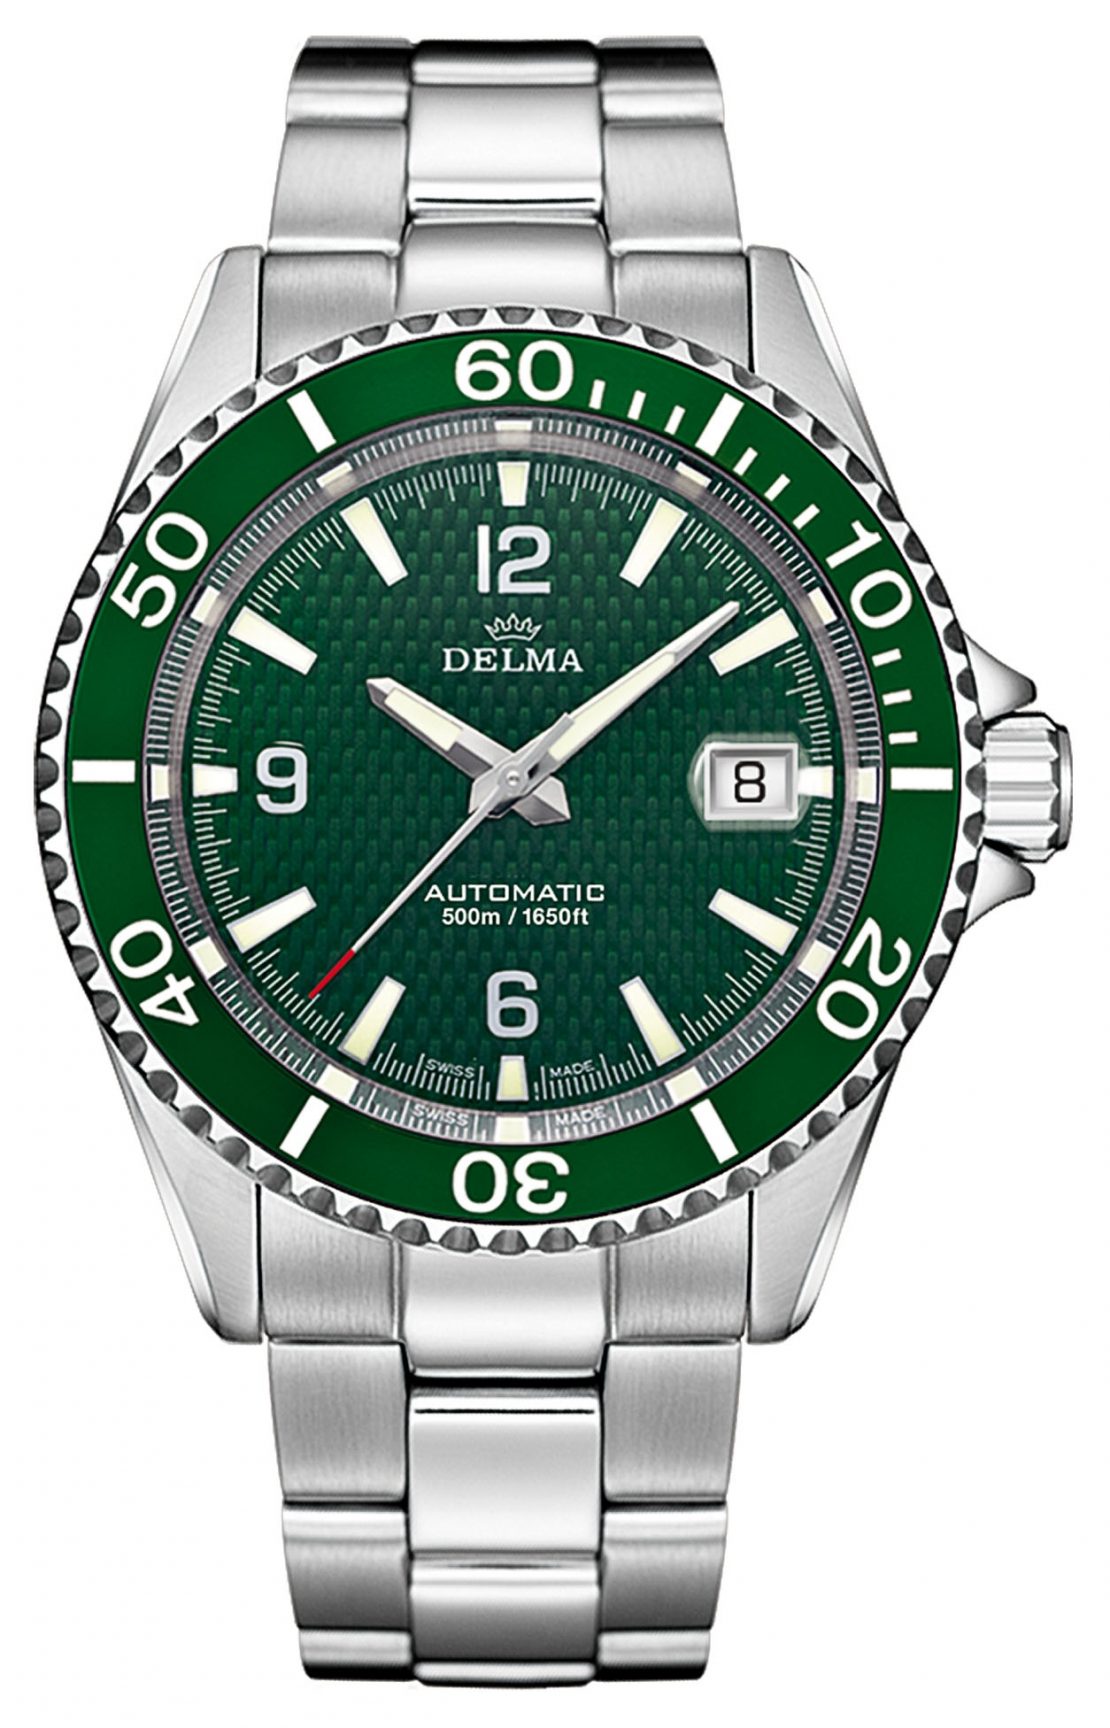 10 On-Trend Green Watches for Men 2021 - First Class Watches Blog